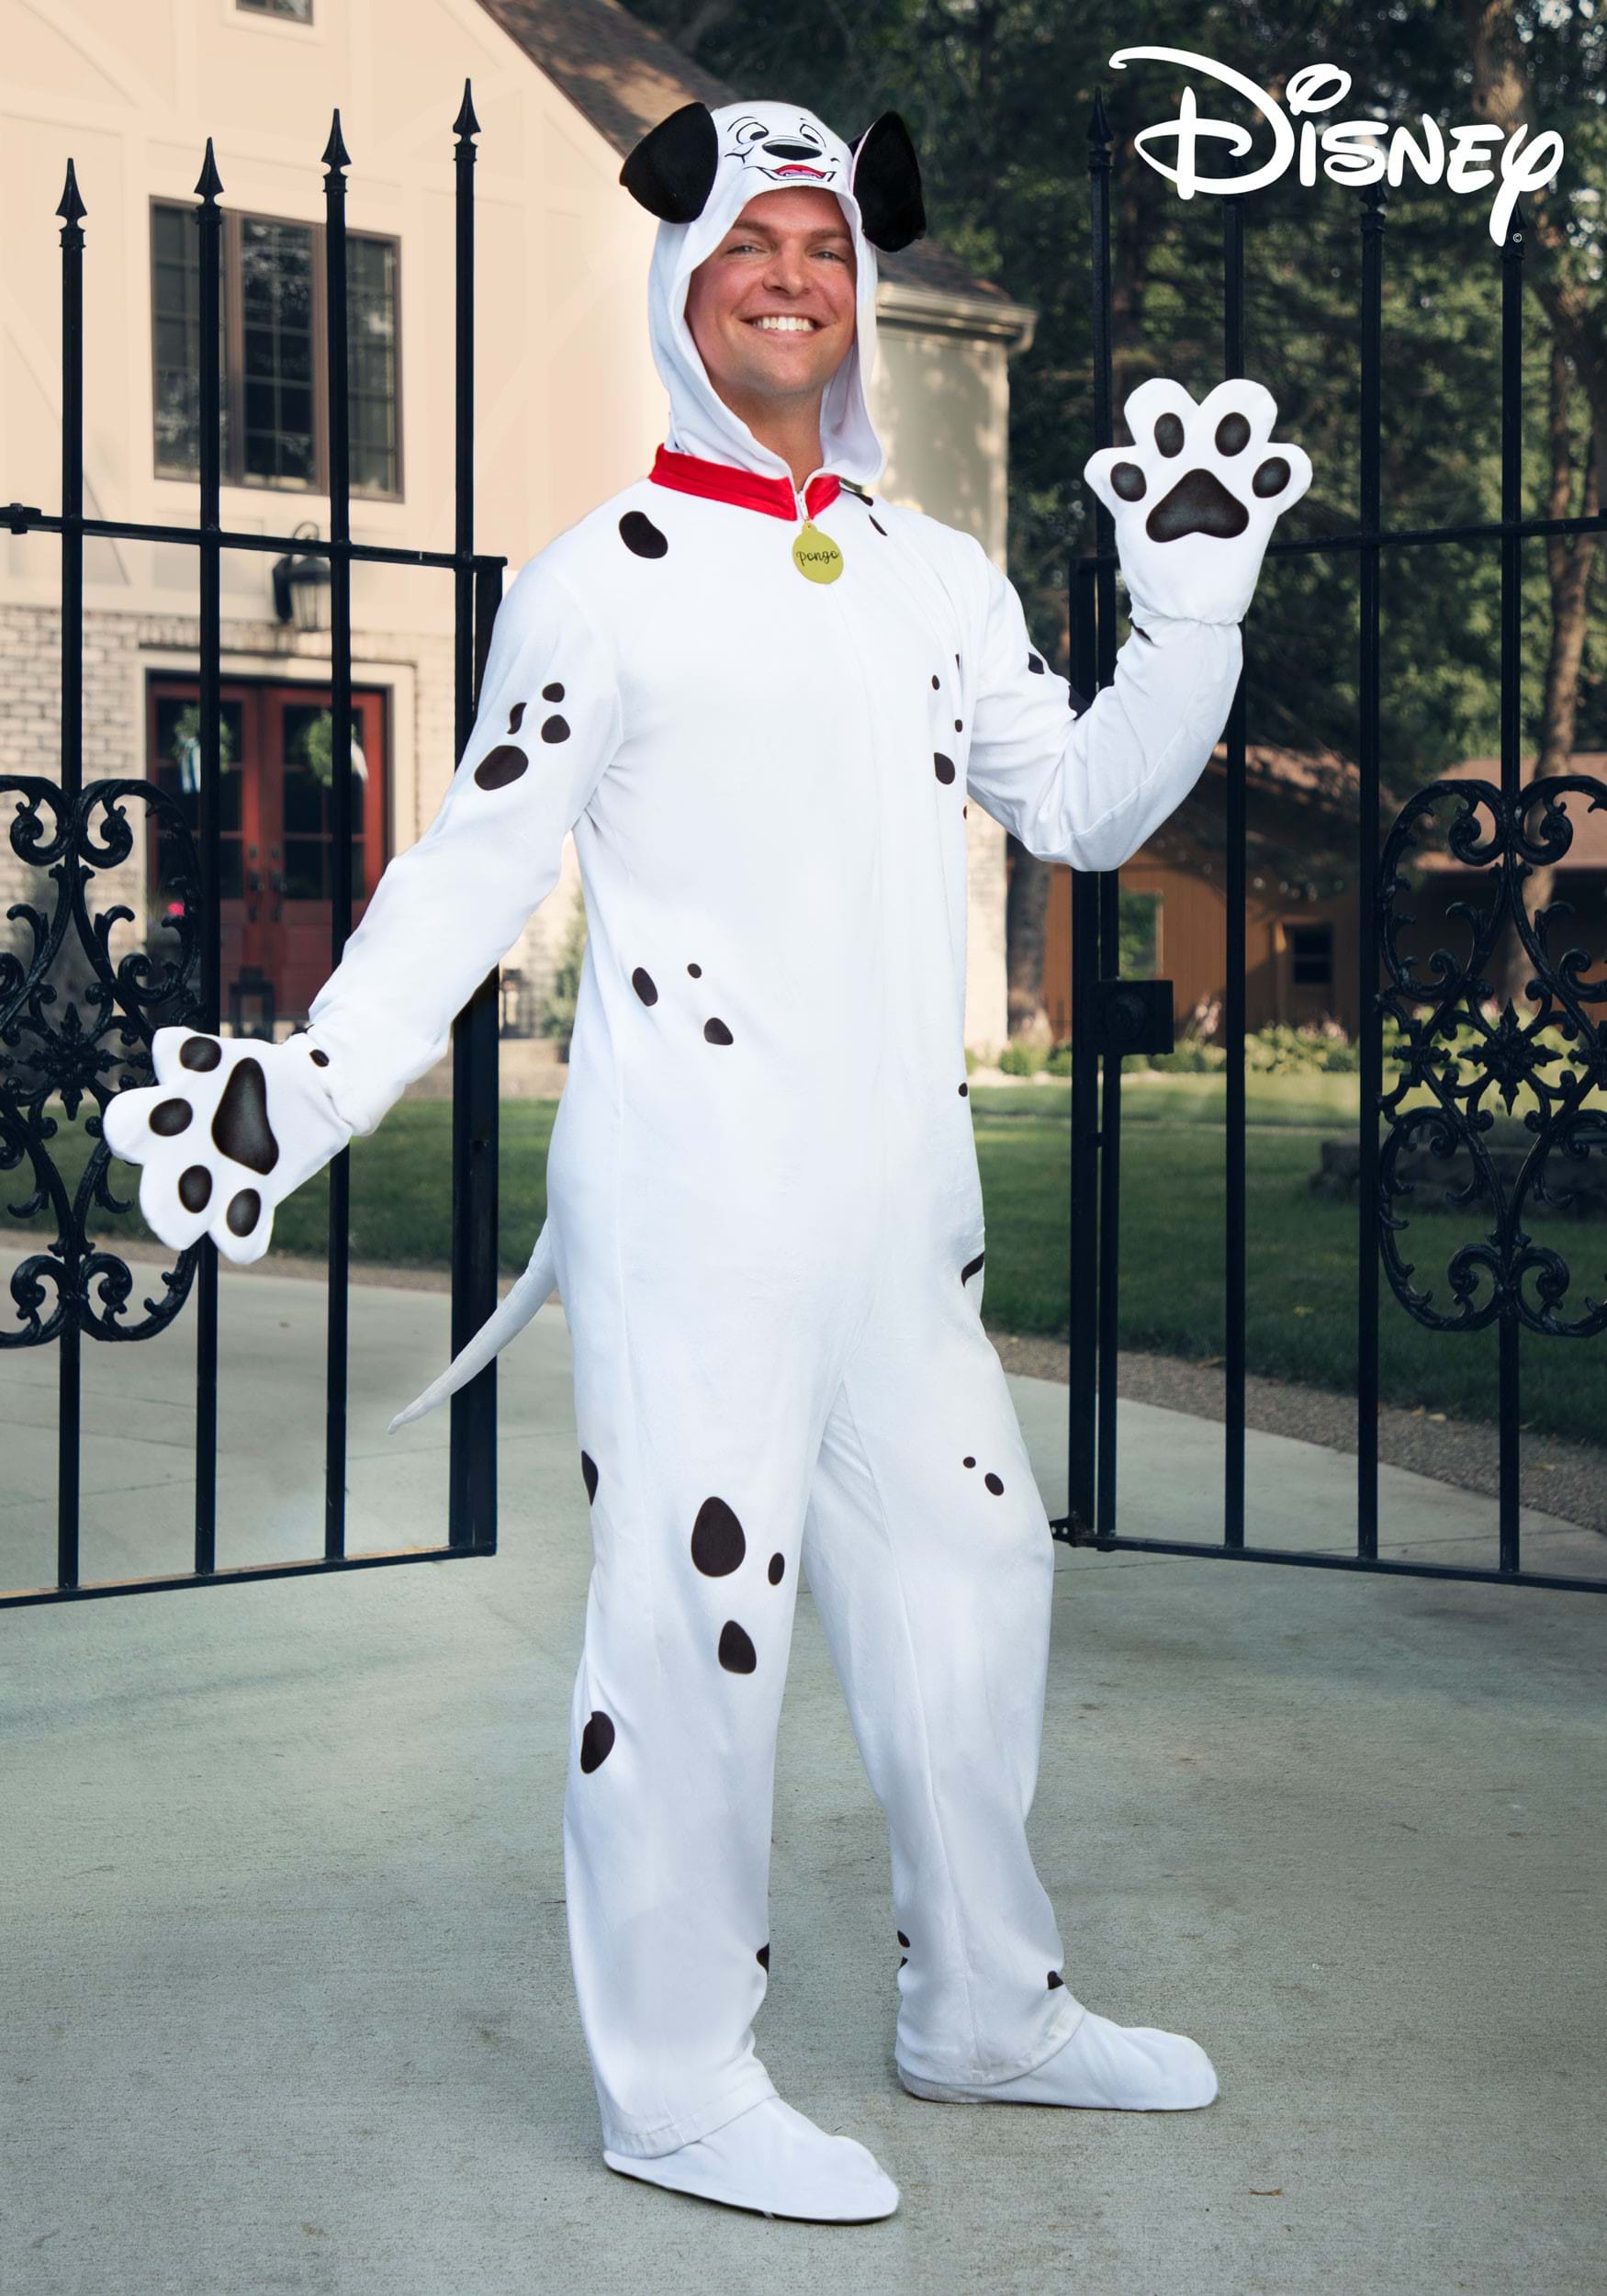 Things About 101 Dalmatians You Only Notice As An Adult